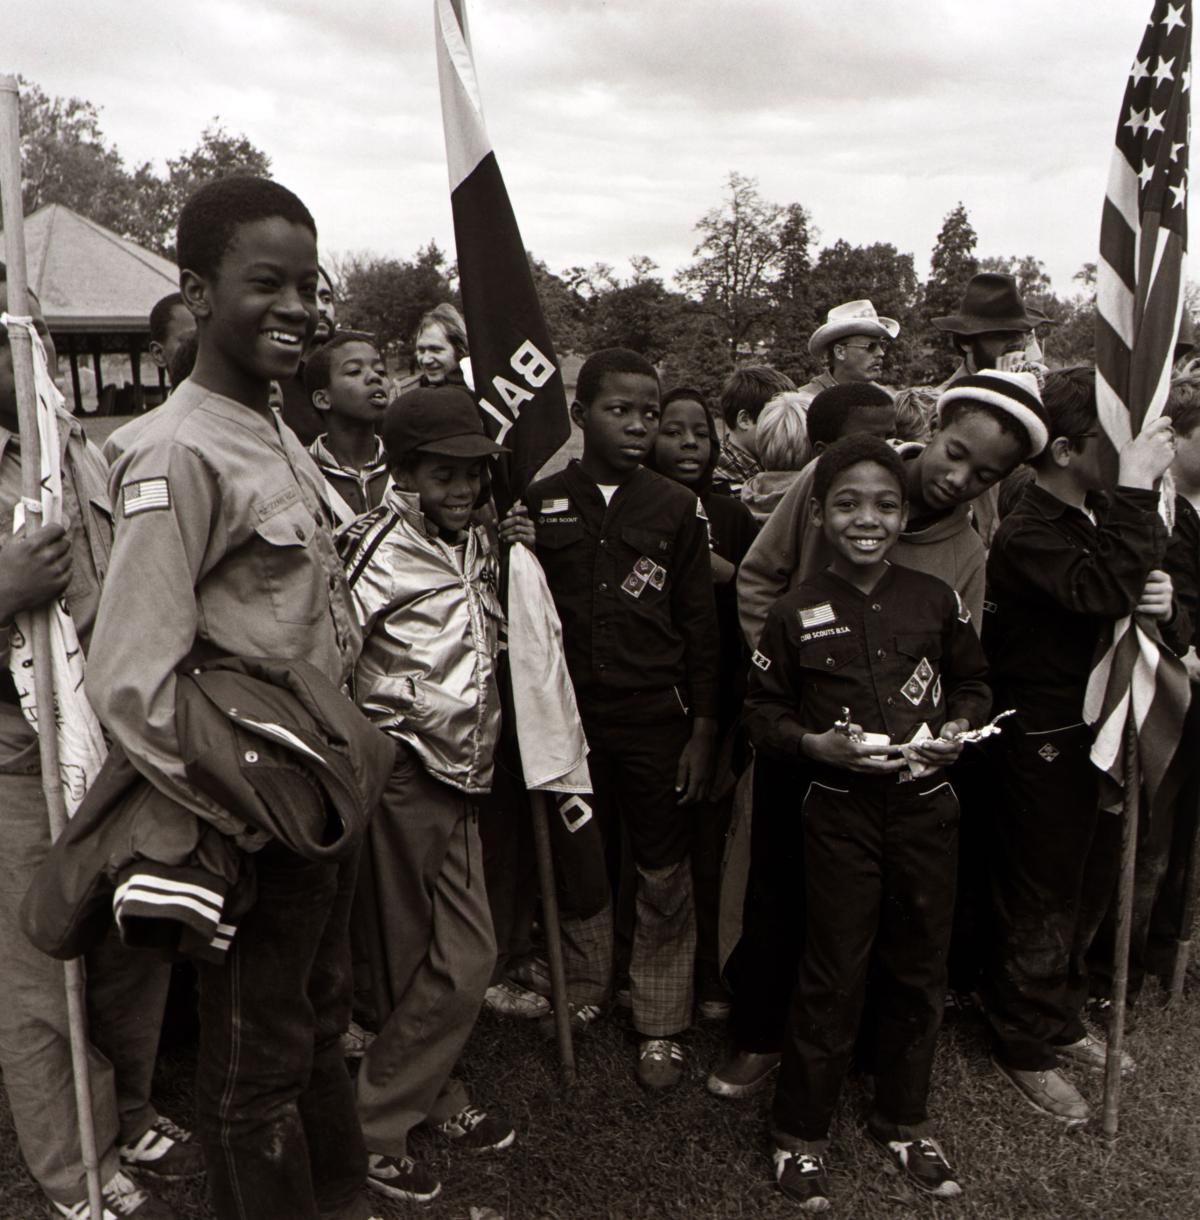 black and white photo of a troop of Black boy scouts at awards ceremony